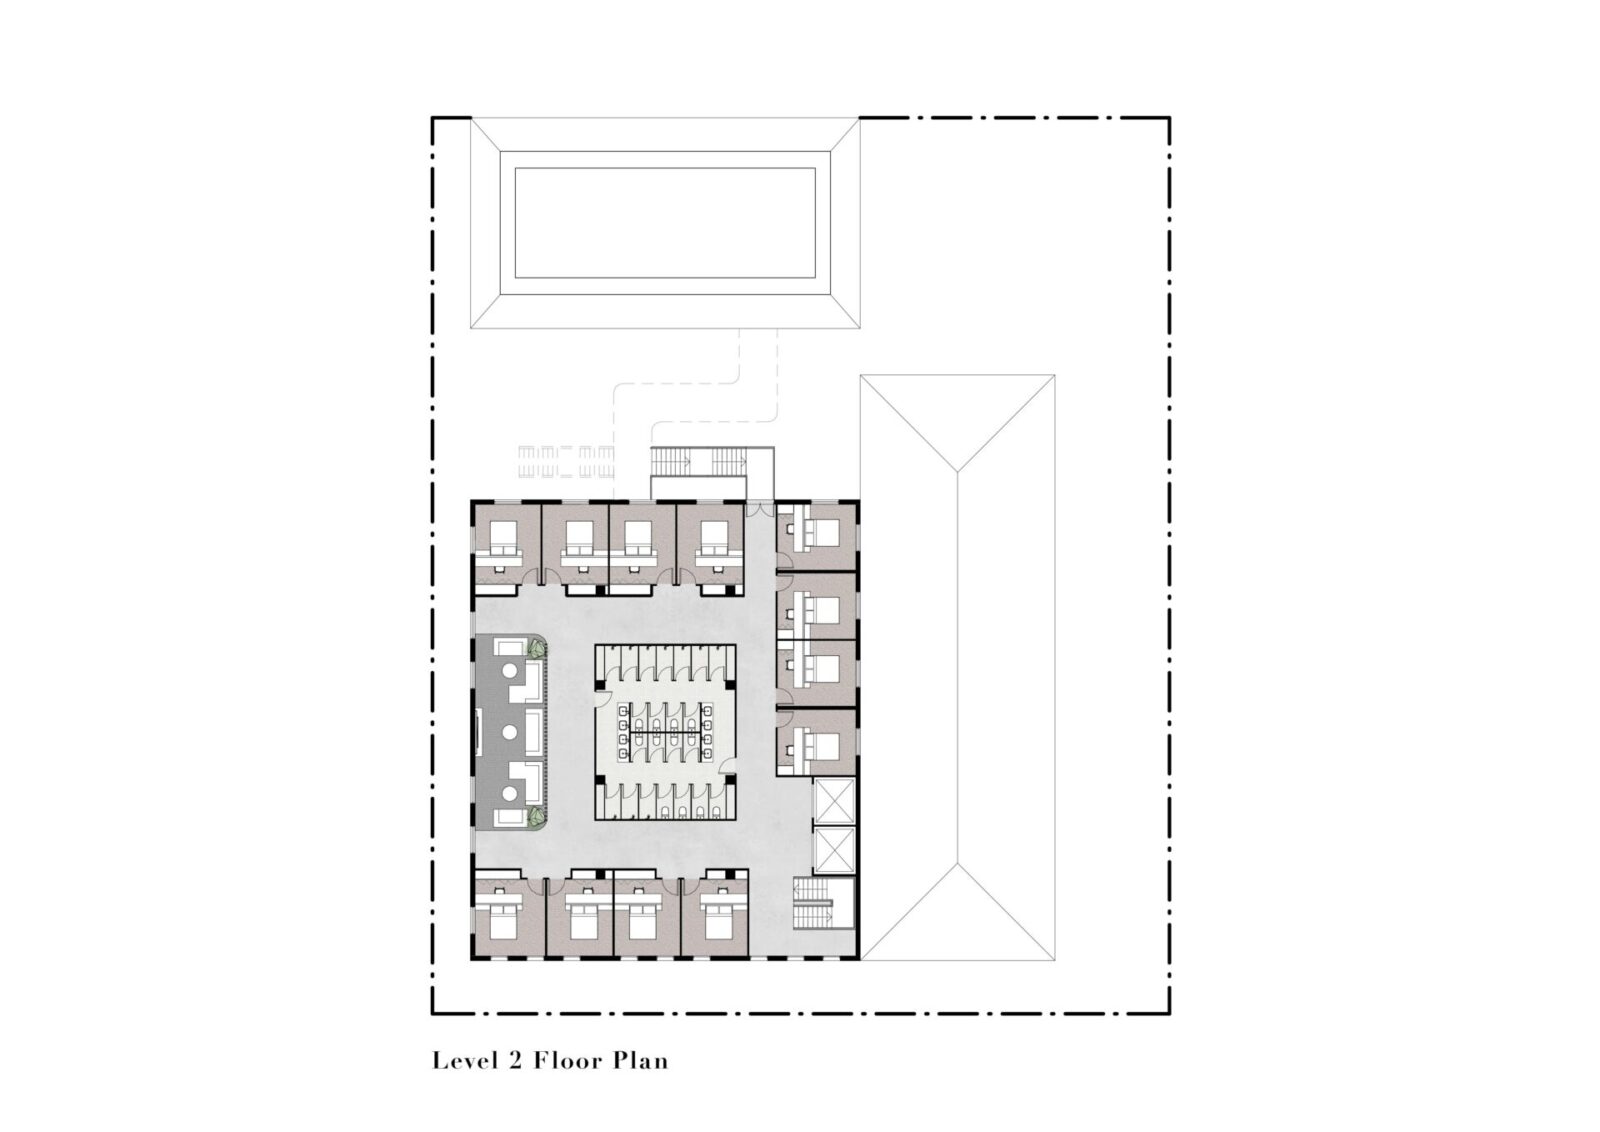 Level 2 floor plan for Stand Up Facility. 